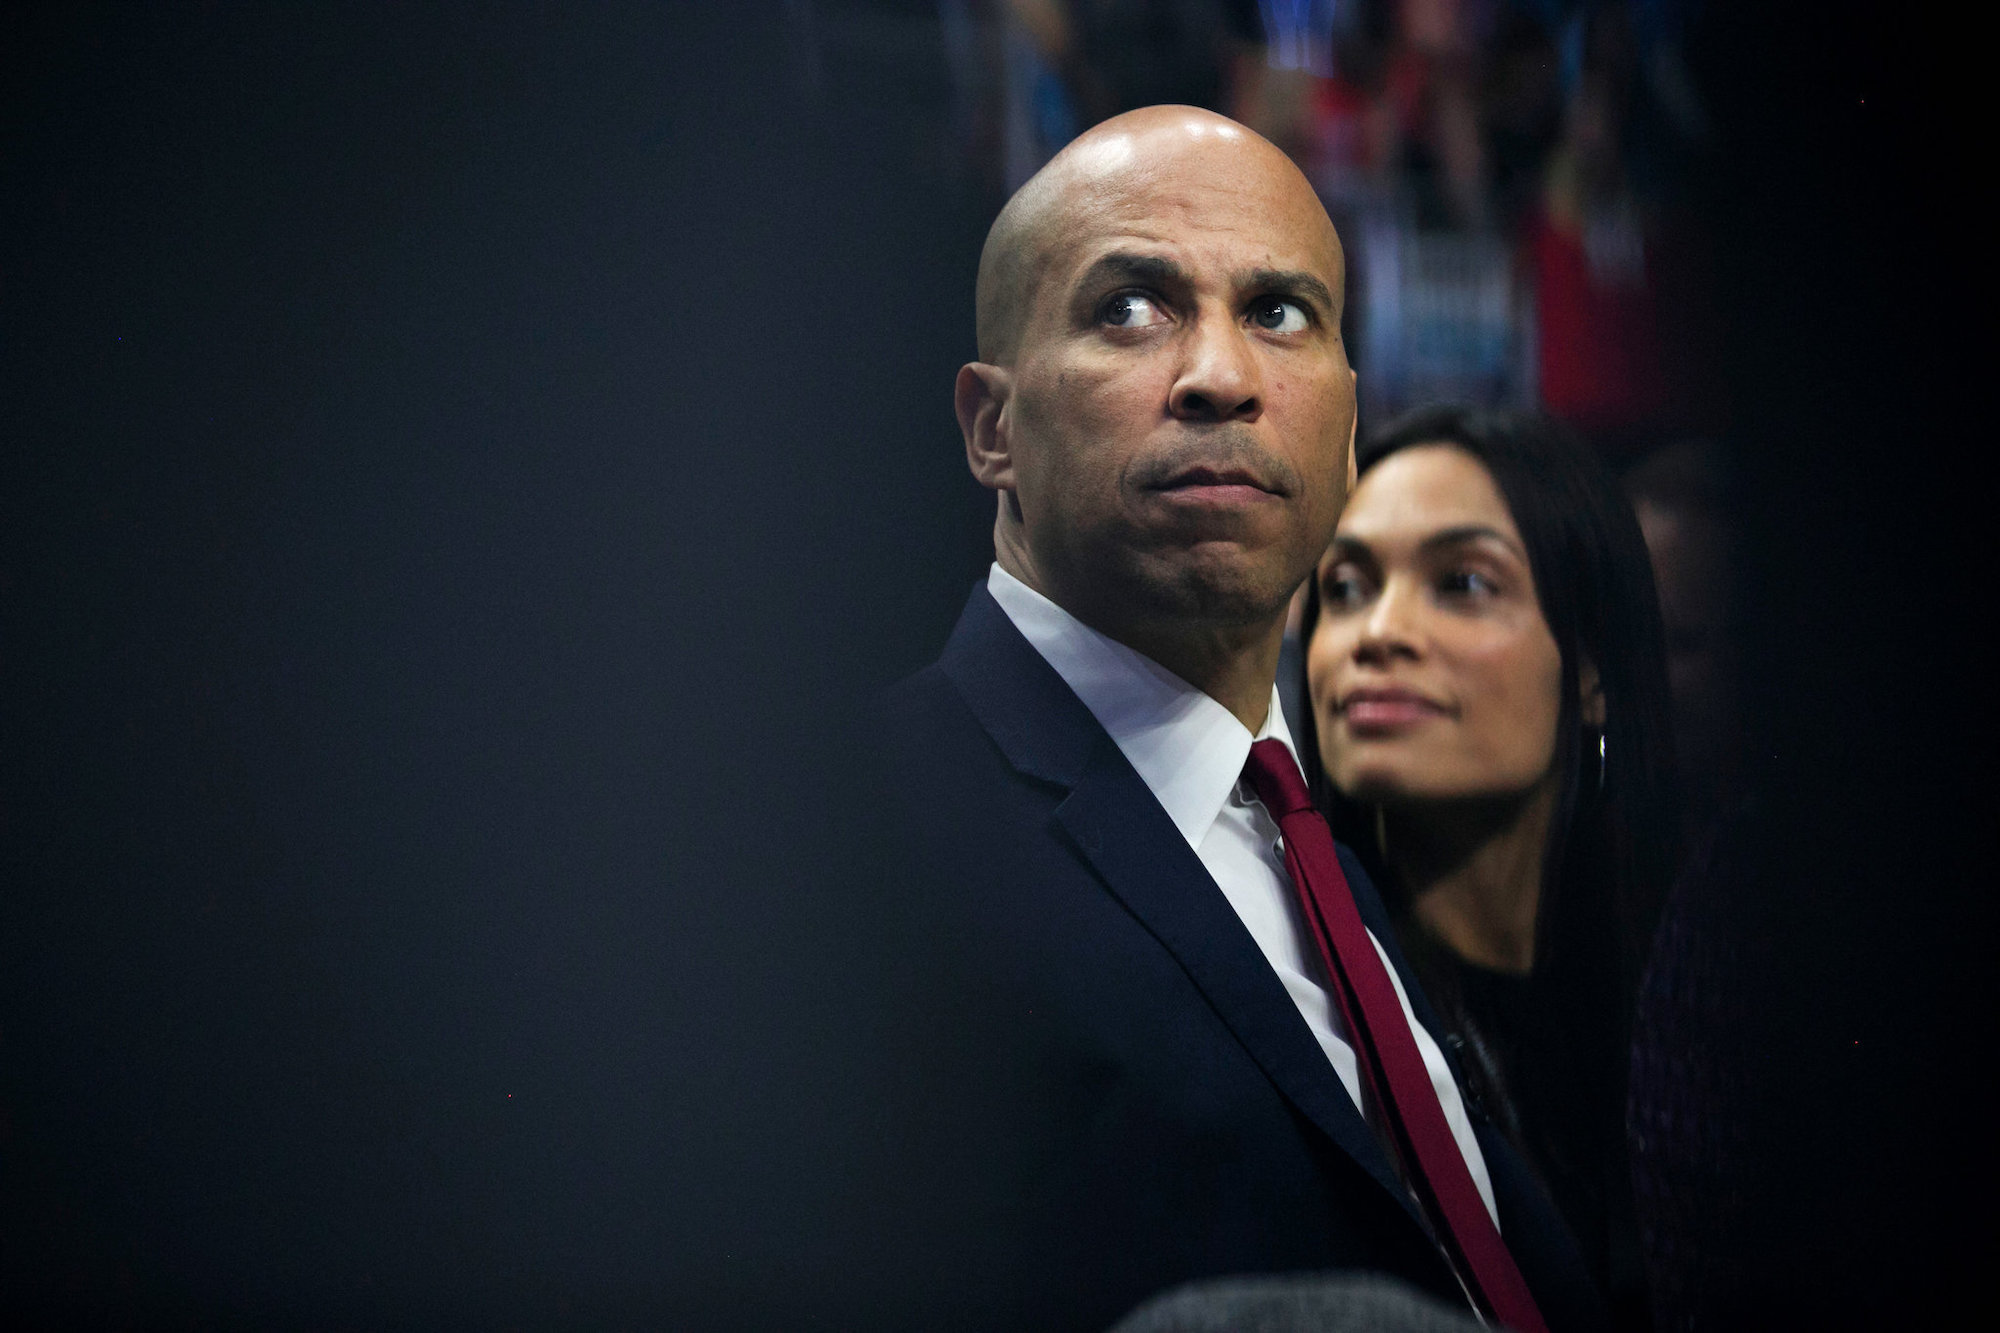 Cory Booker Drops Out of 2020 Presidential Race | The New York Times